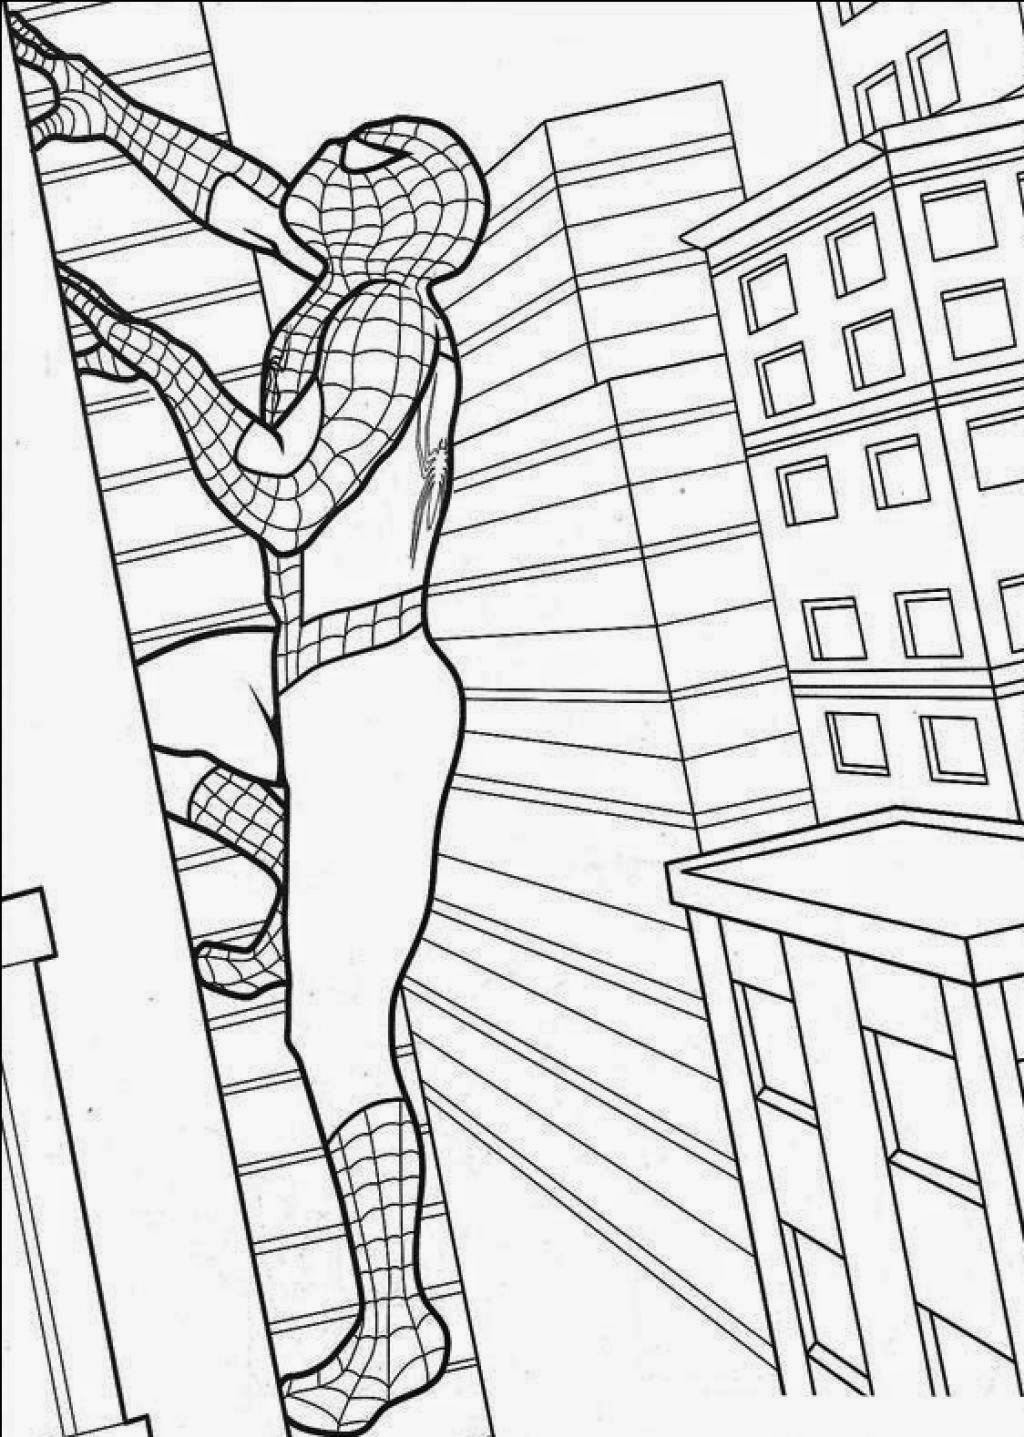 Spiderman free printable coloring pages coloring.filminspector.com